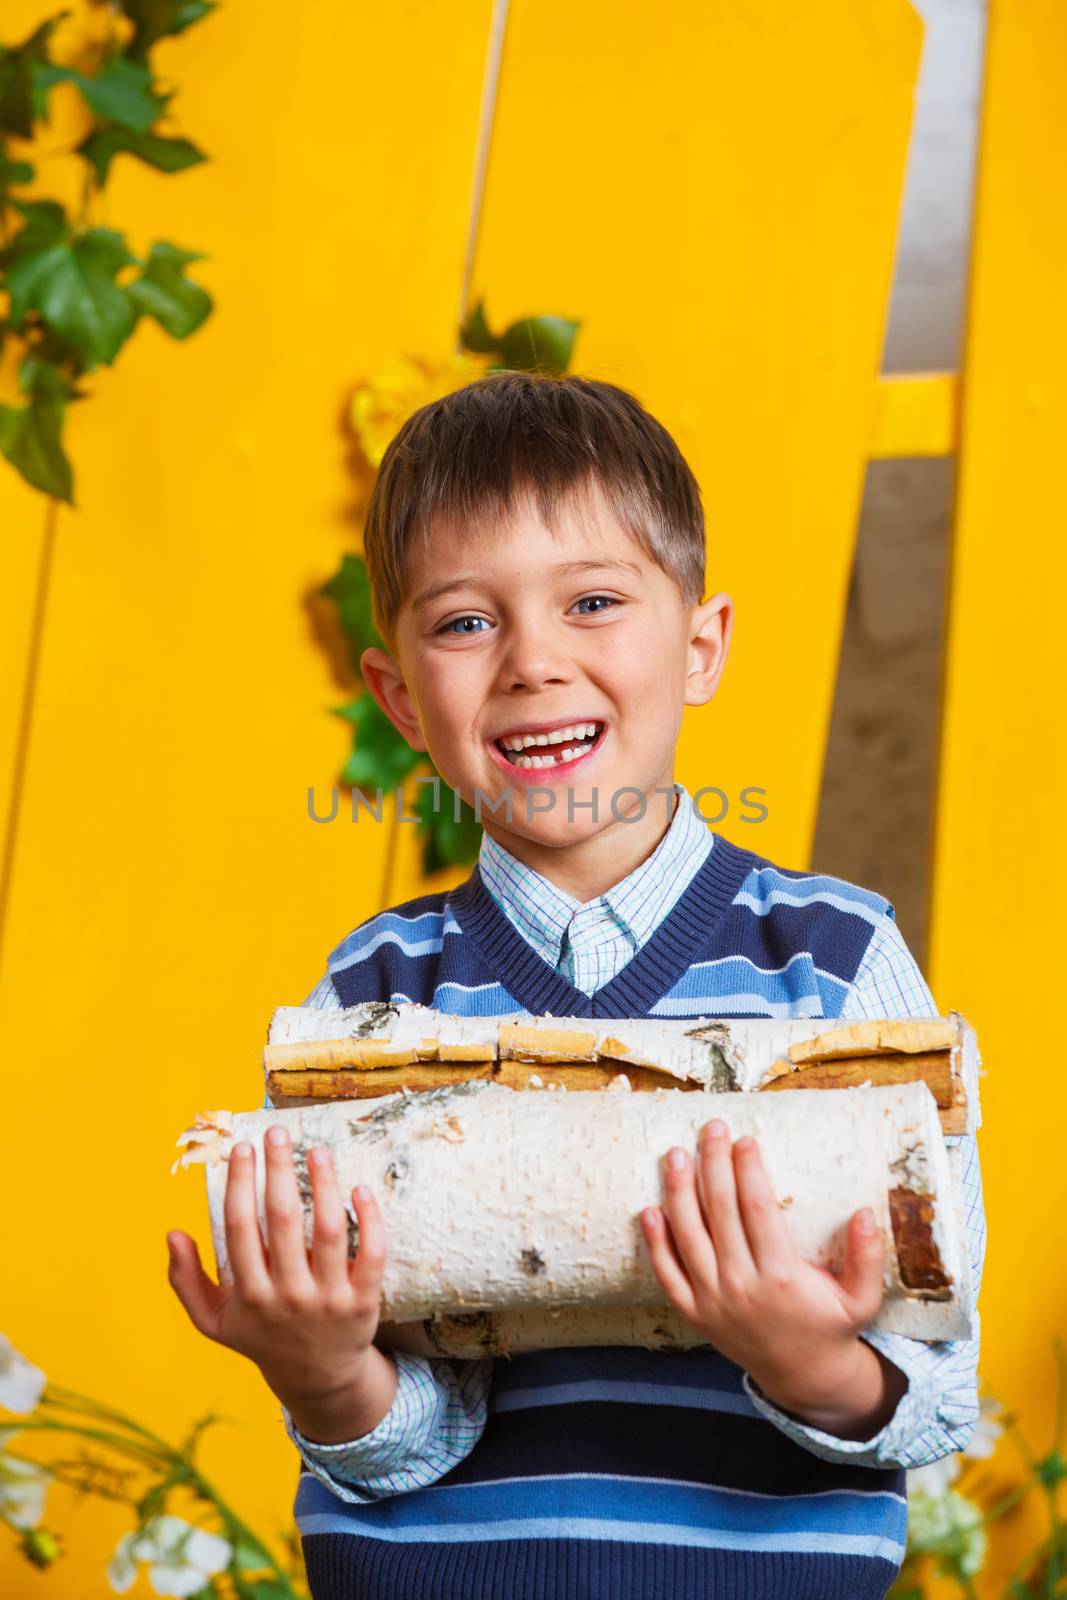 Portrait of a cute little boy with pile of firewood at yellow fence background